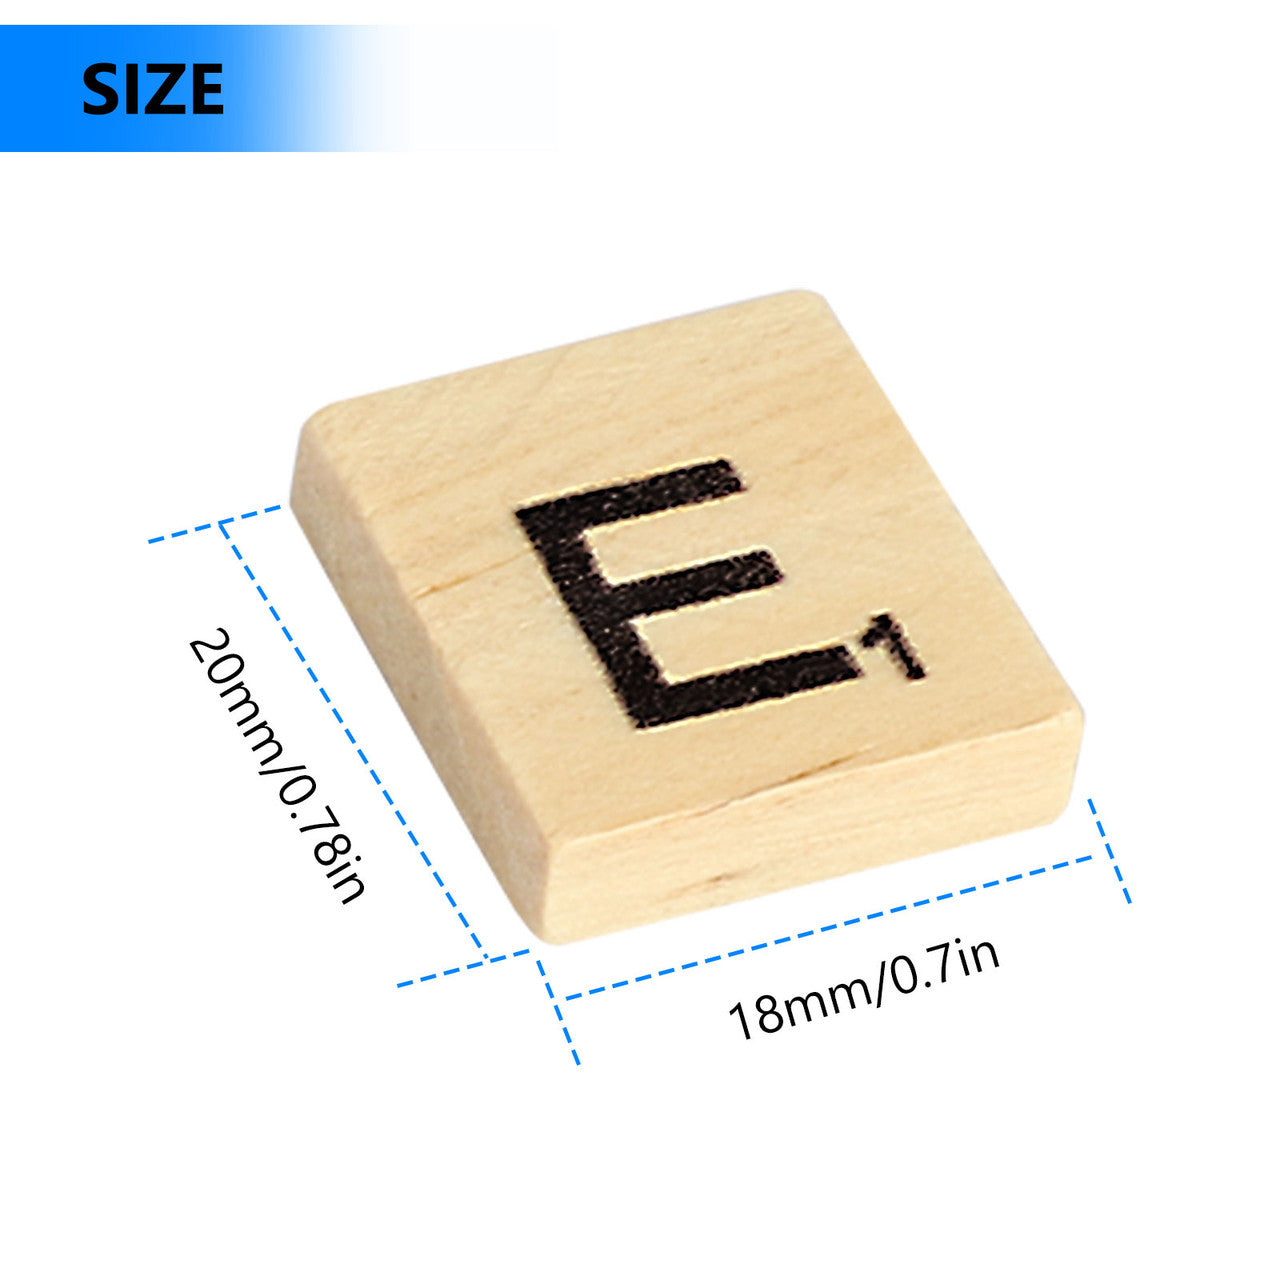 Wood Letter Tiles, Scrabble Letters for Crafts, A-Z Capital Letters for Crafts Spelling, DIY Wood Gift Decoration, Making Alphabet Coasters and Scrabble Crossword Game, 100pcs